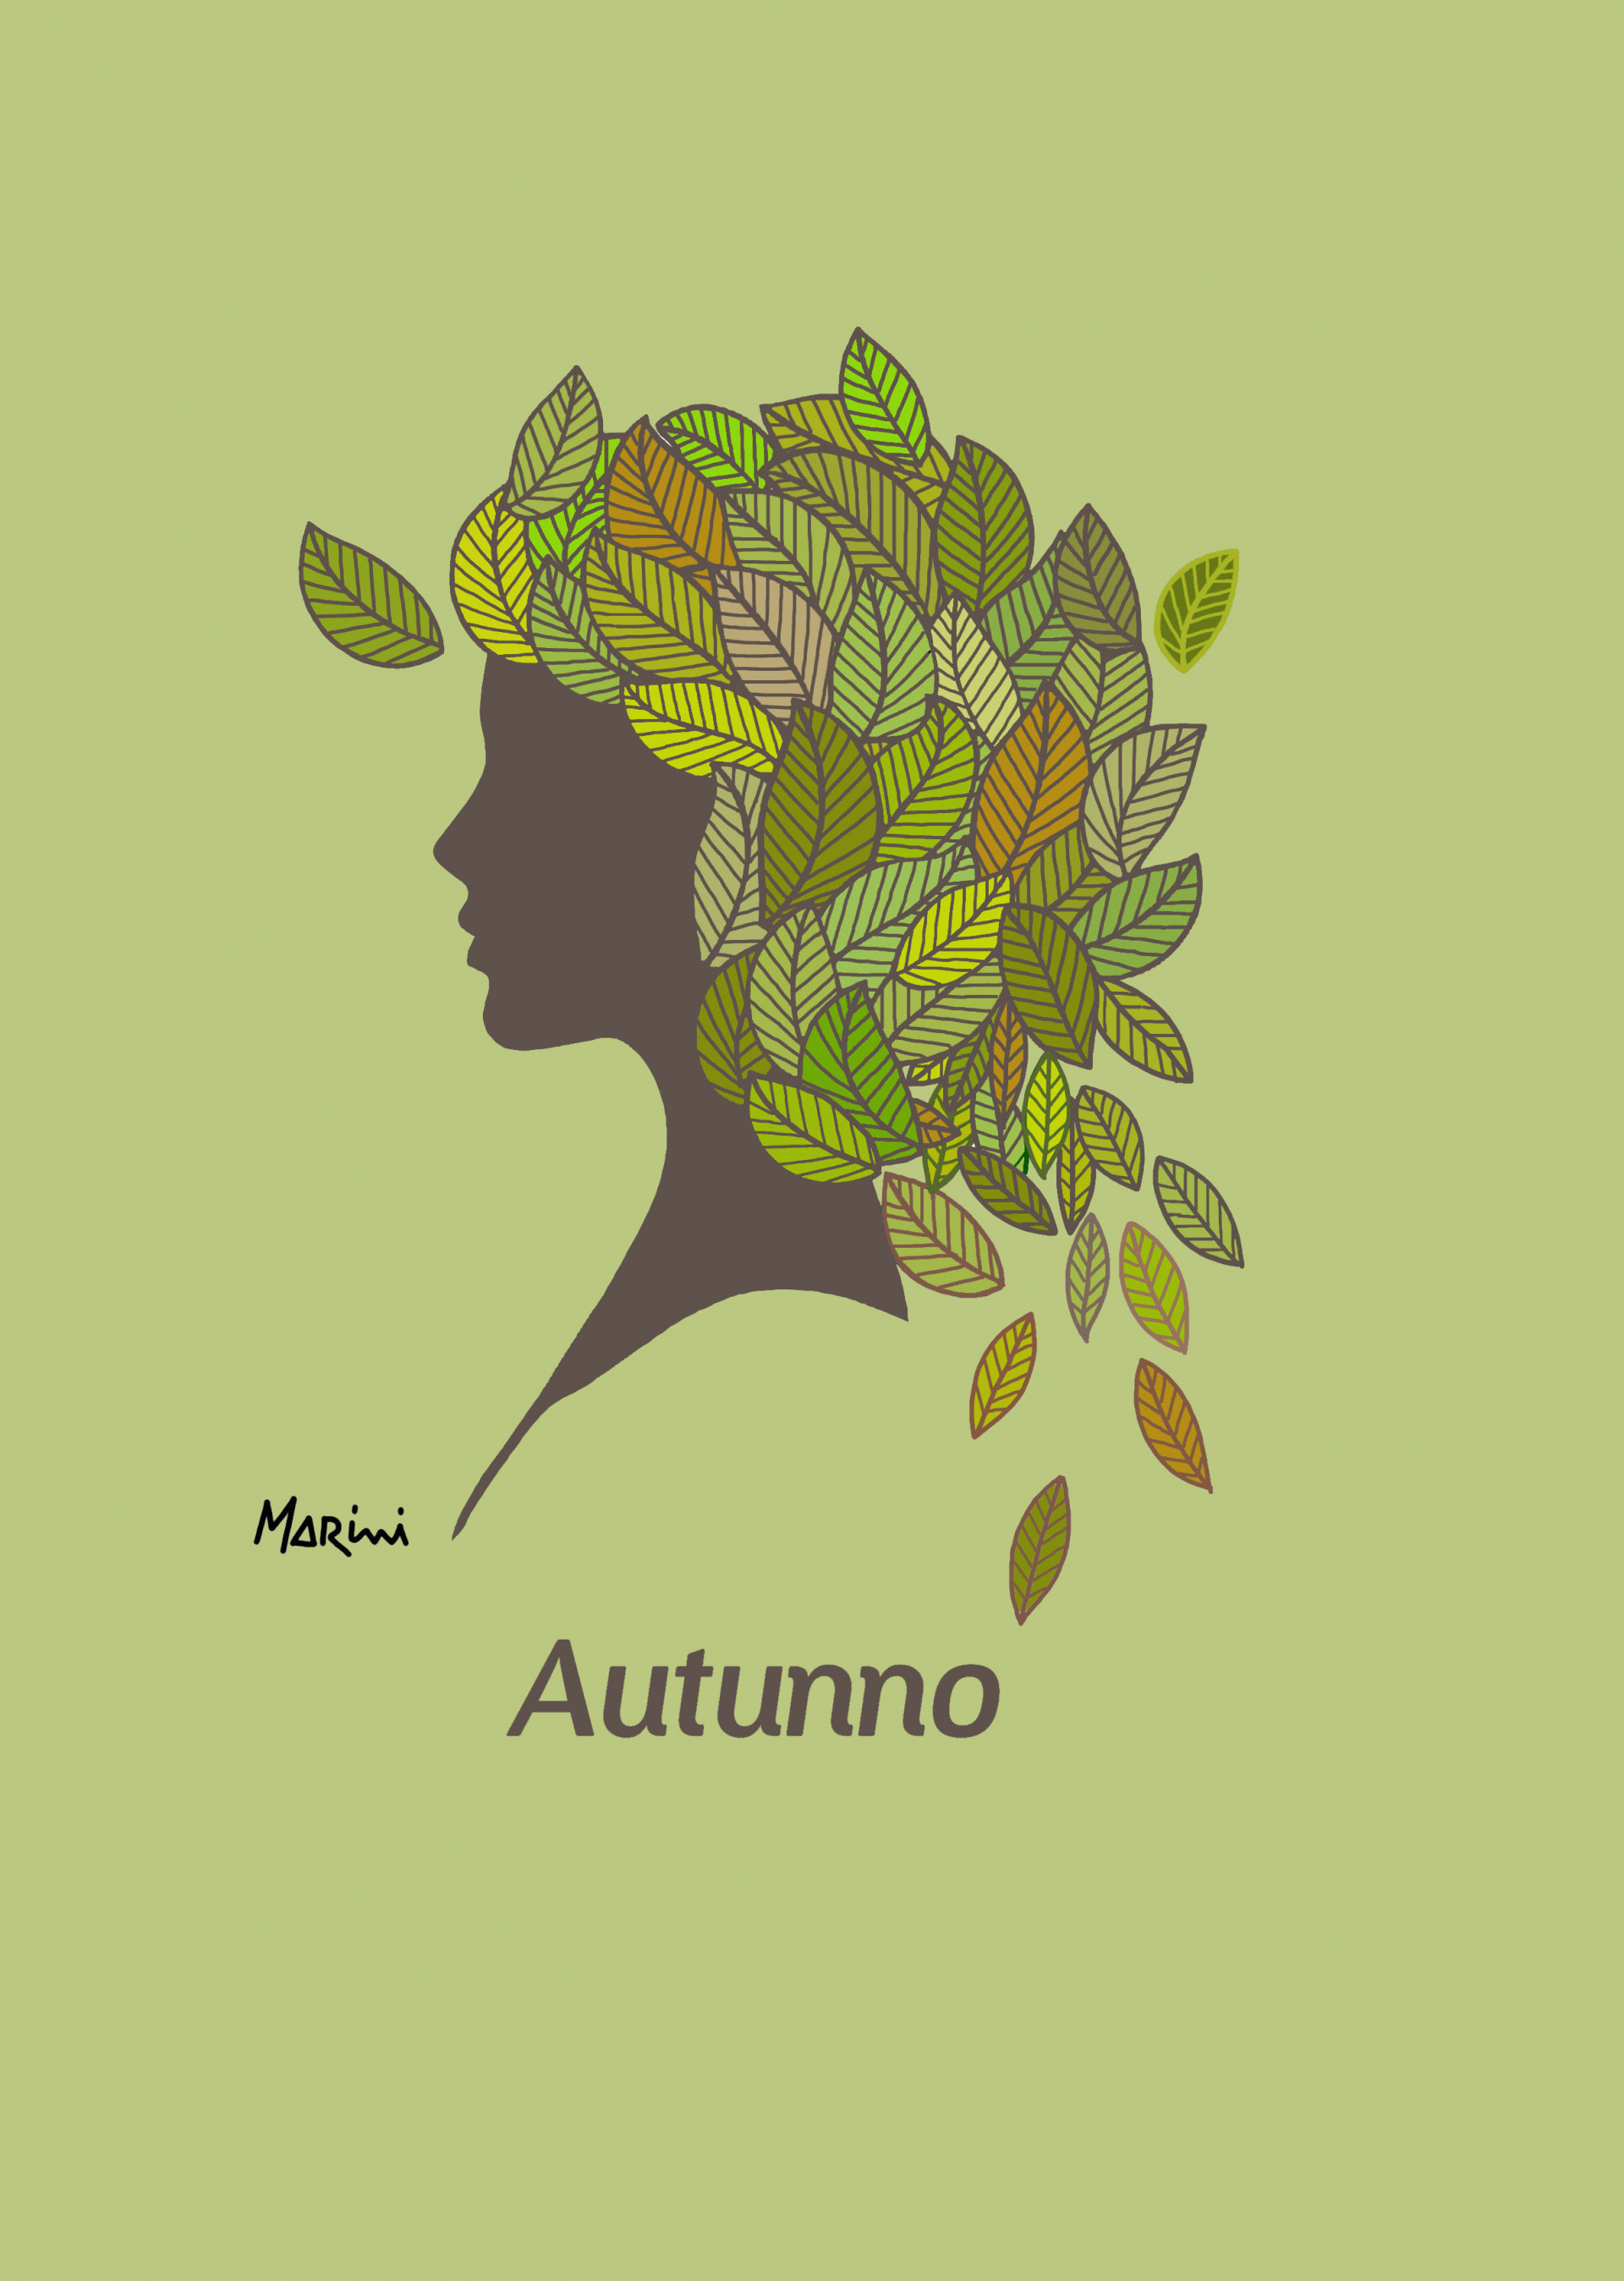 In autunno